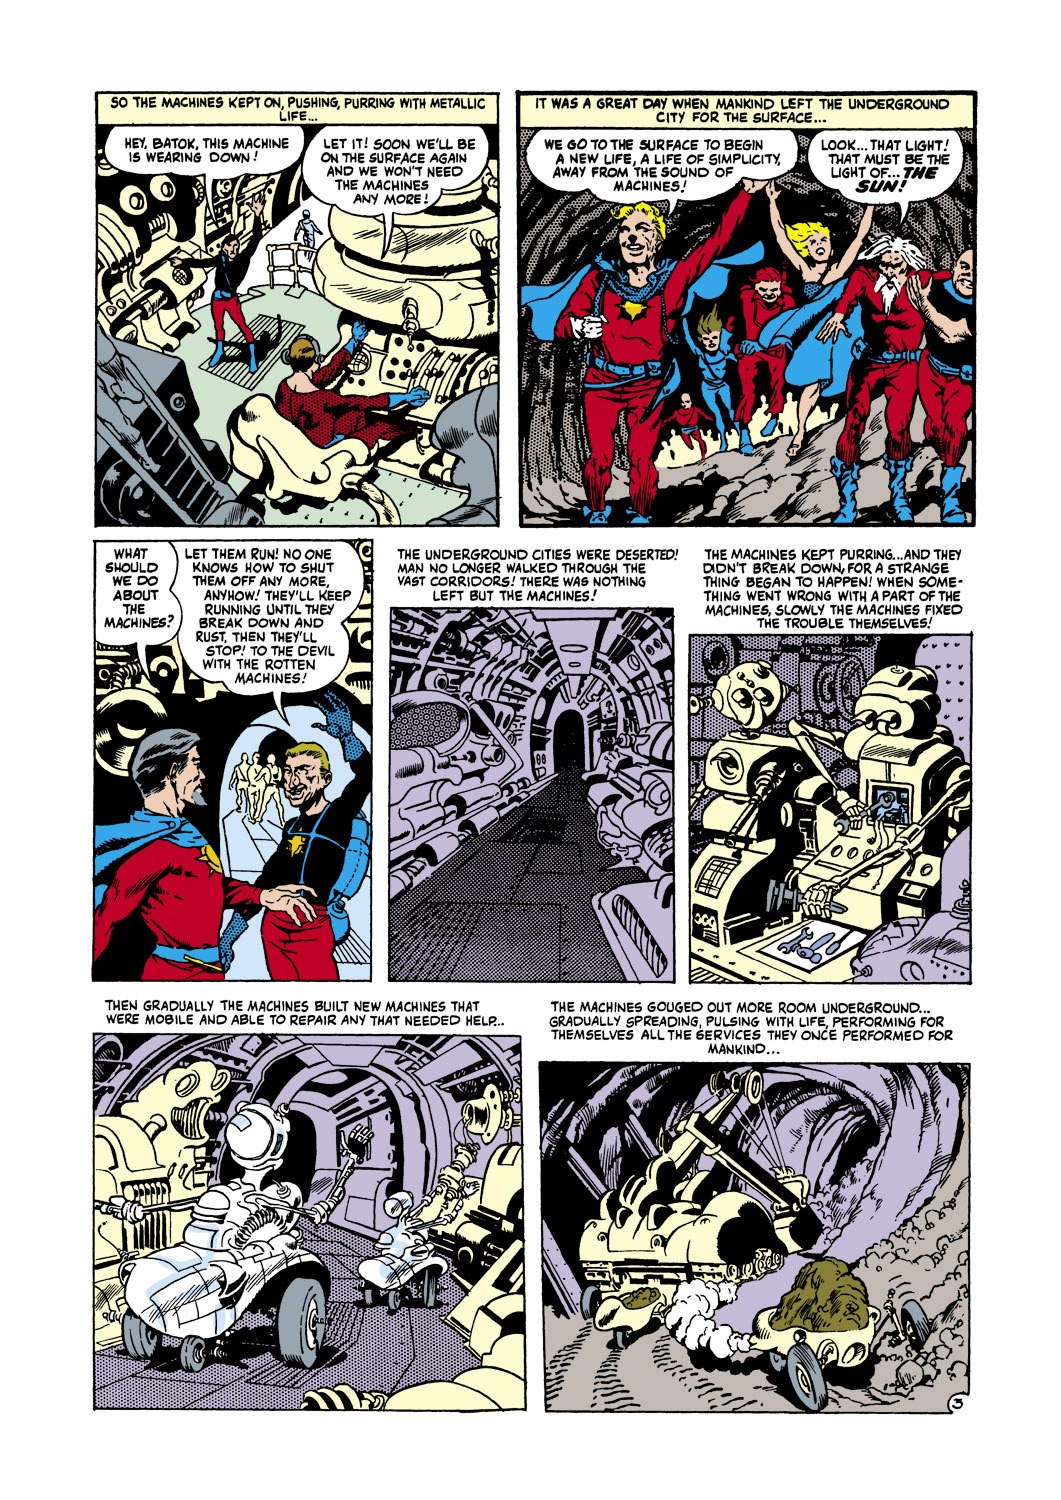 Journey Into Mystery (1952) 17 Page 7